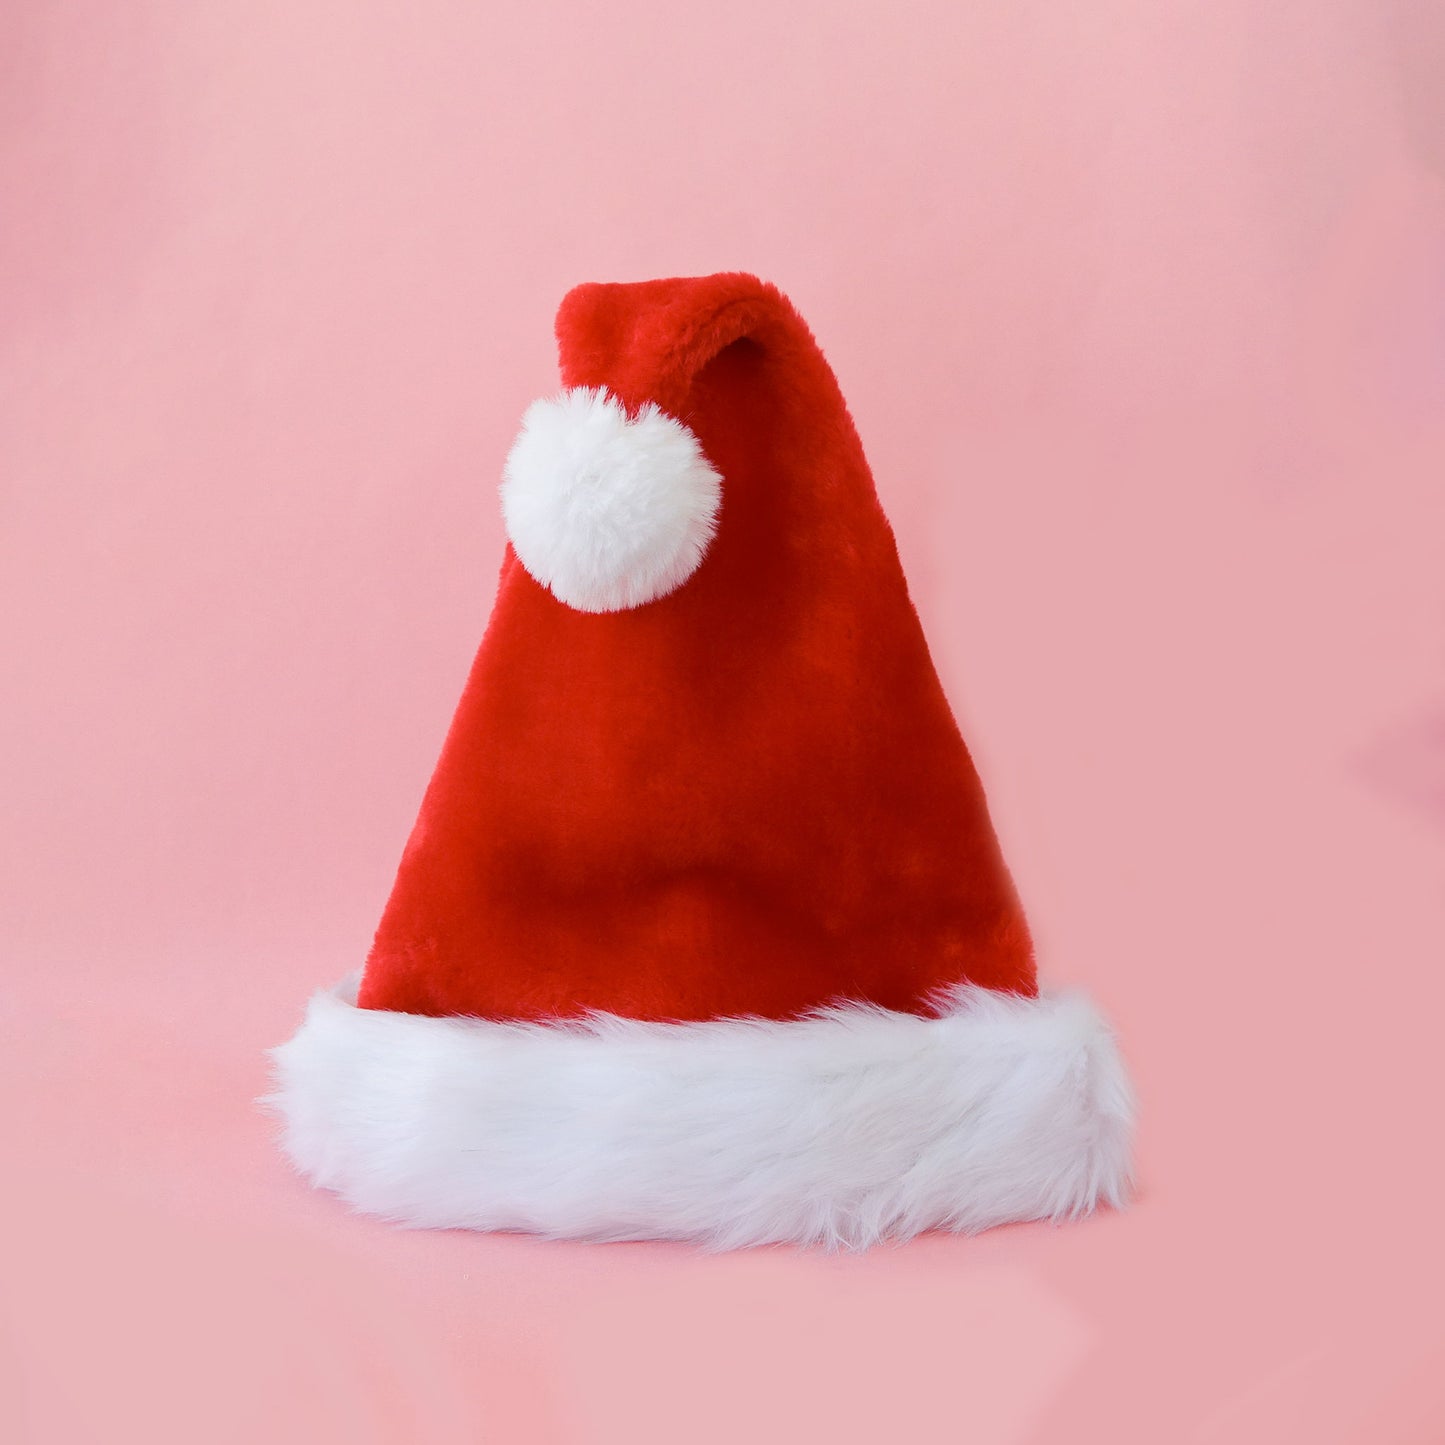 On a pink background is a red Santa hat with white accents and faux fur. 